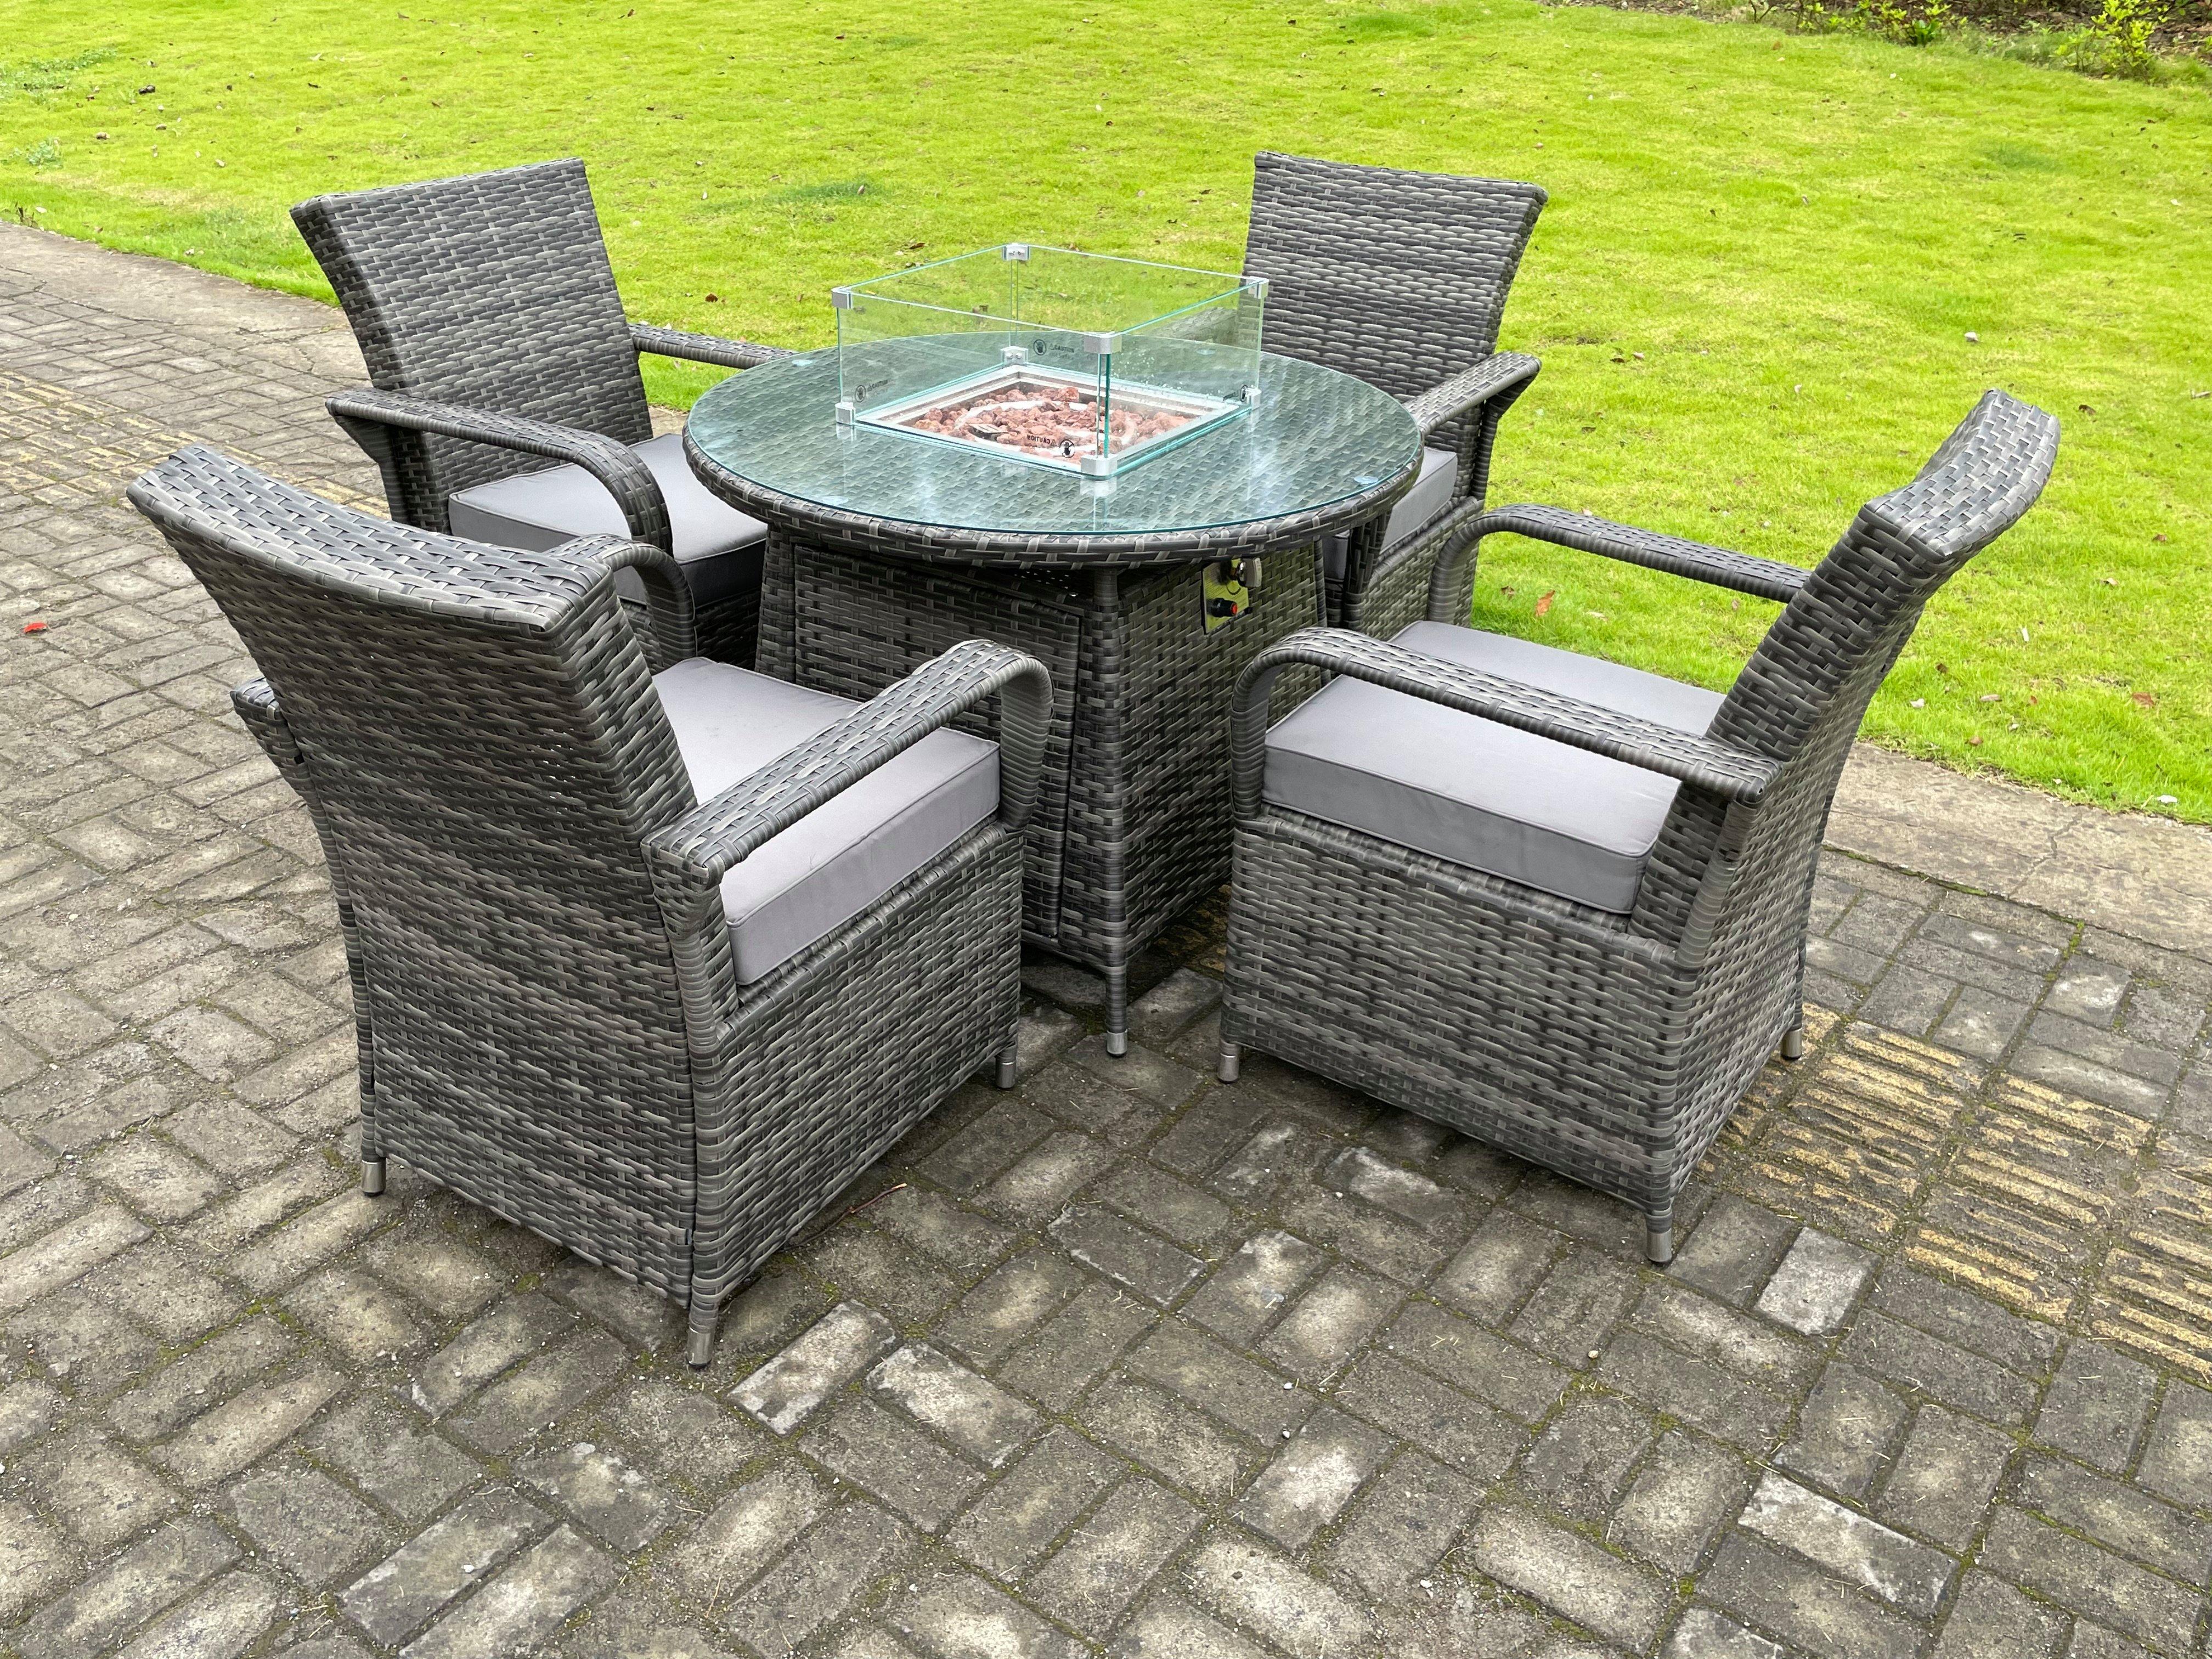 Rattan Garden Furniture Gas Fire Pit Round Dining Table Set Gas Heater And Dining Chairs 4 Seater